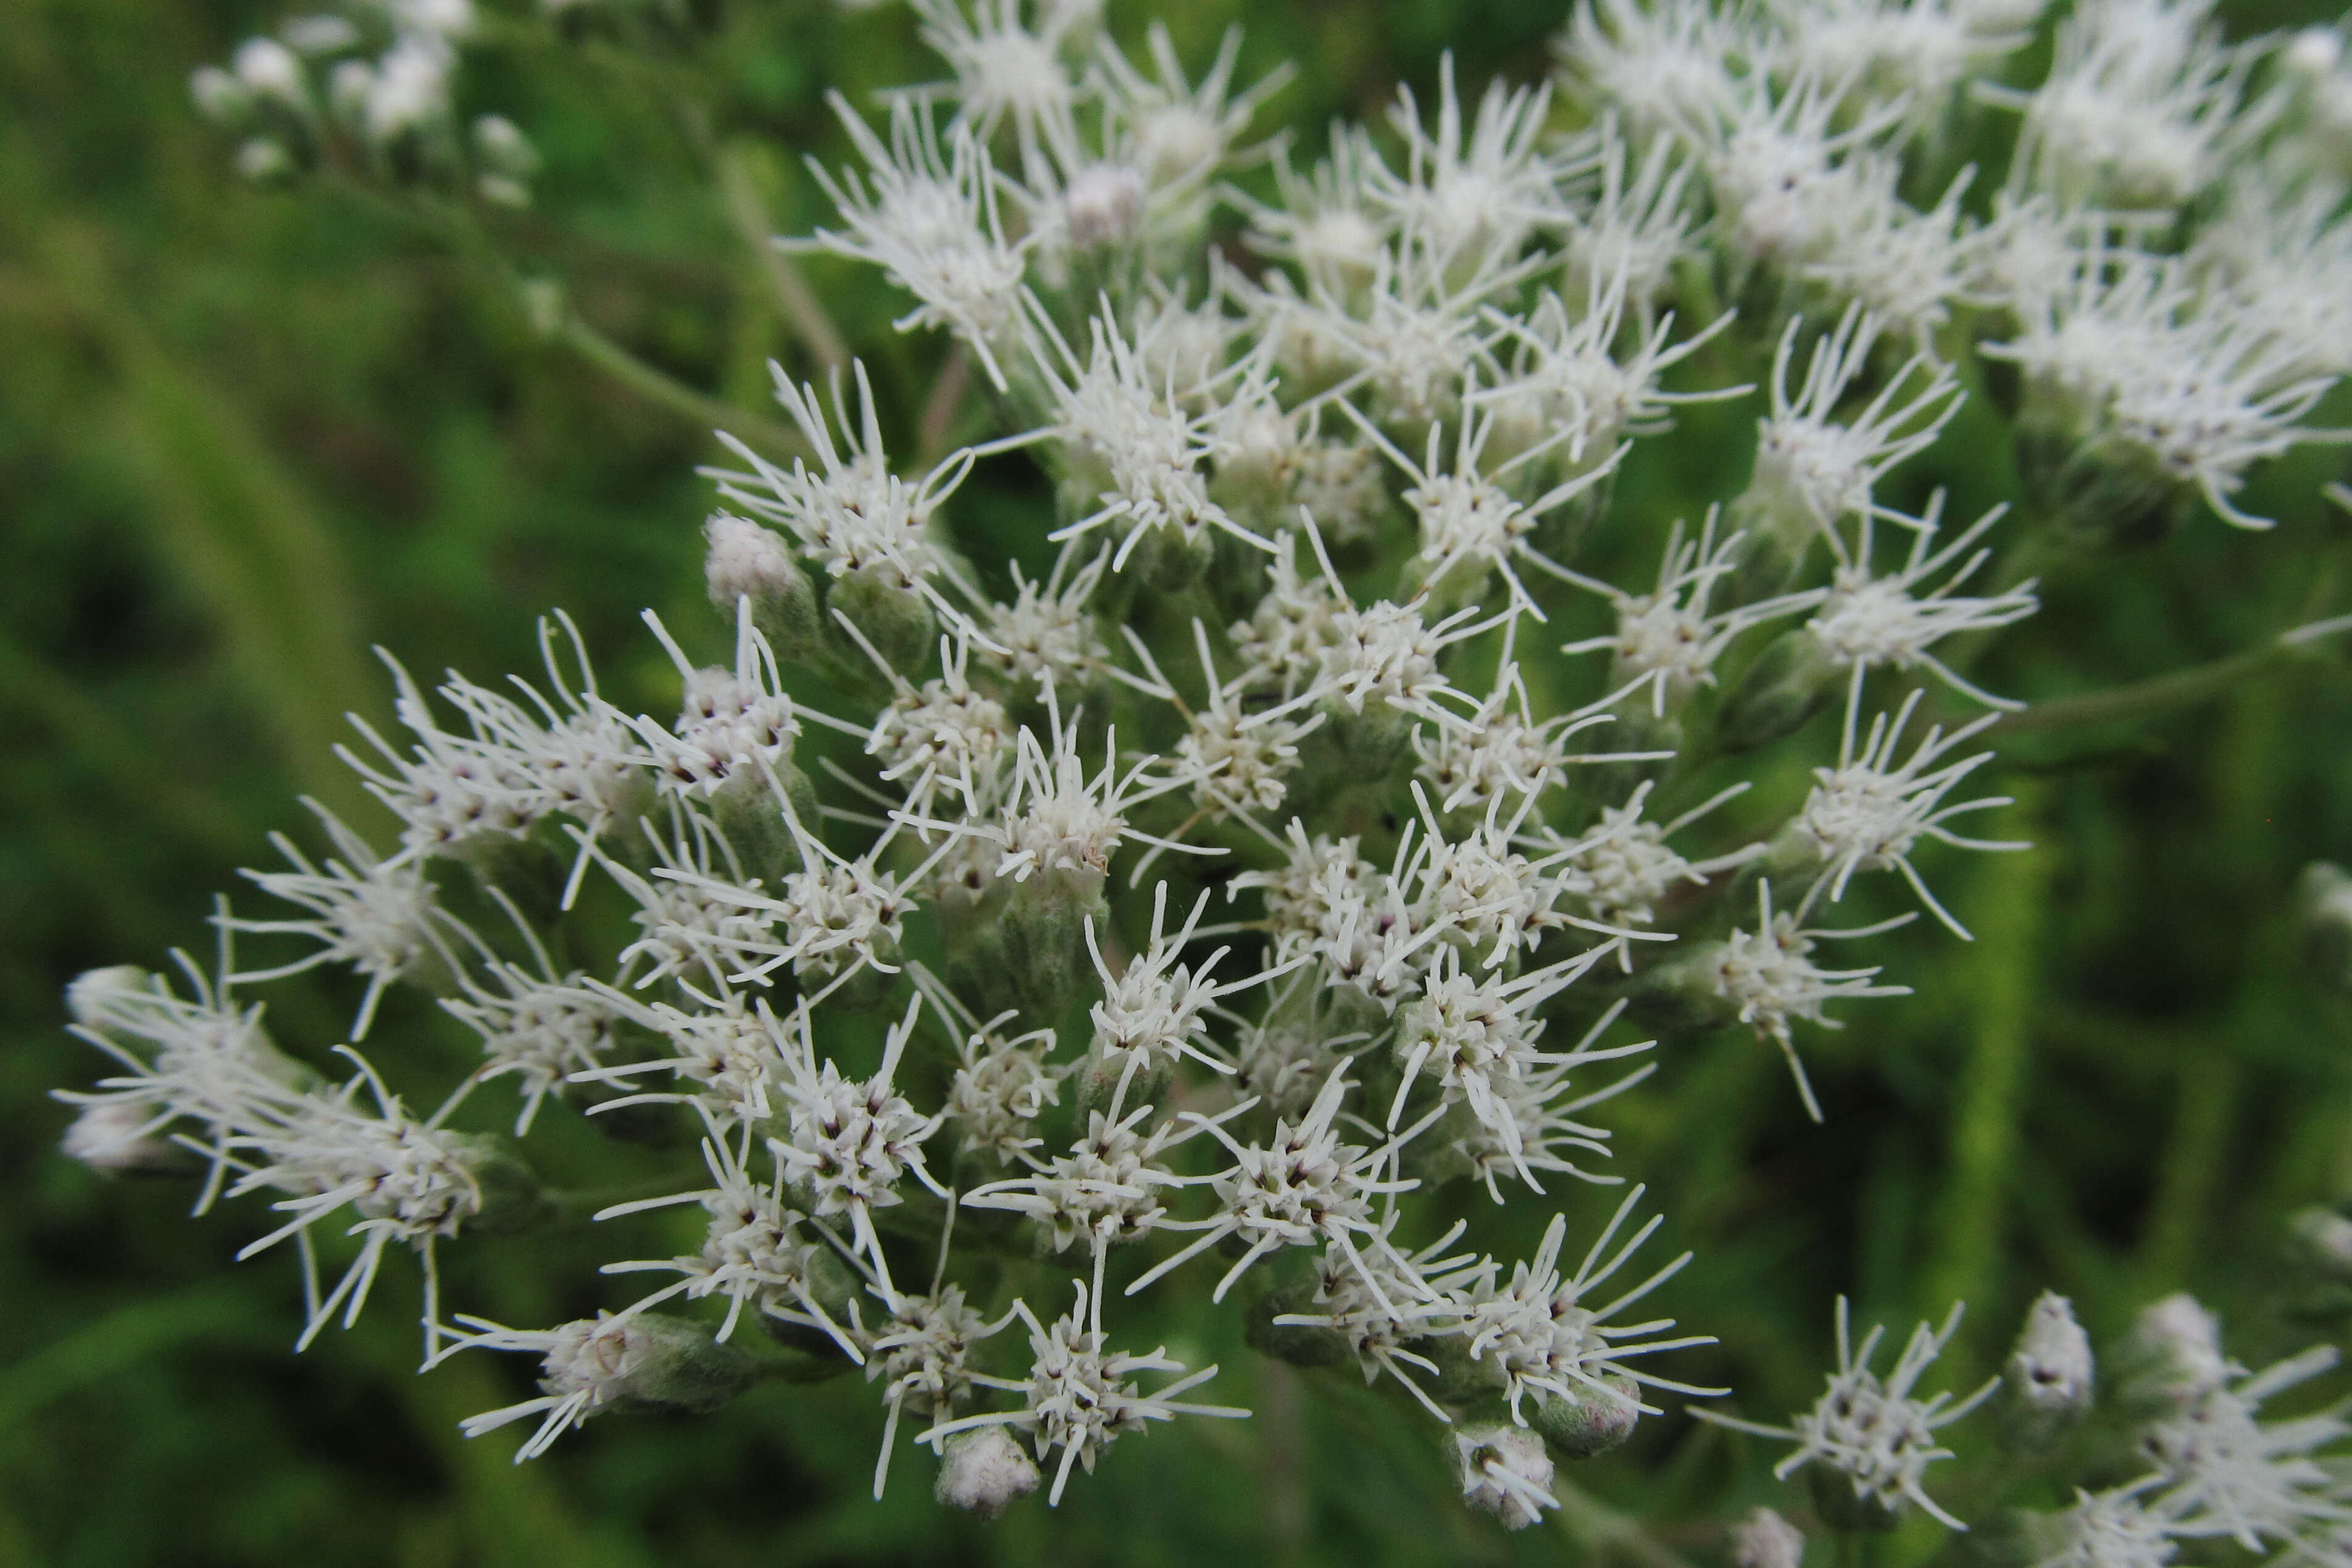 Image of tall thoroughwort